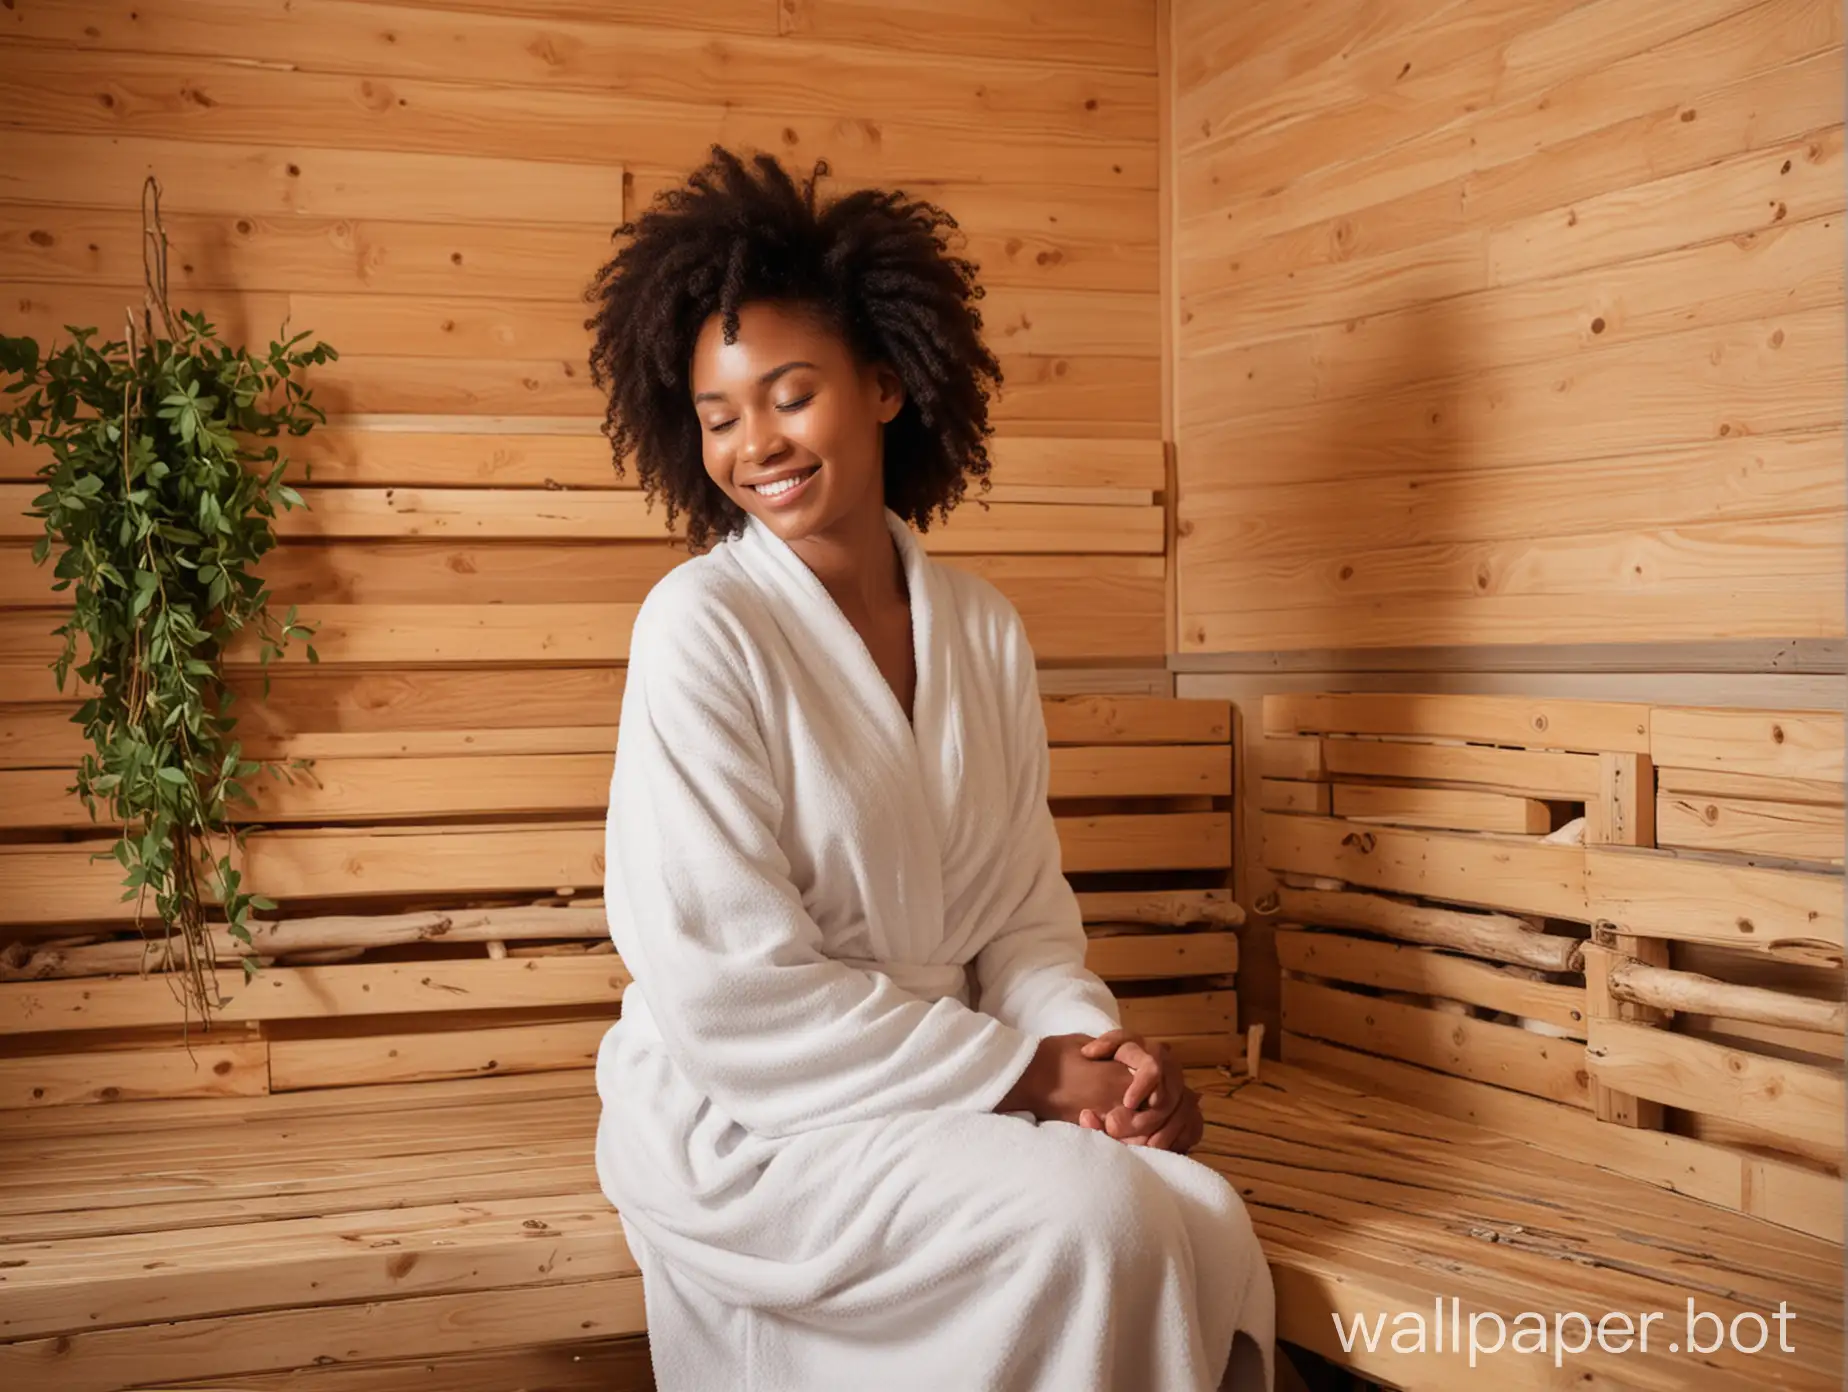 generate photo A Black woman sits on a bench in a white robe in the sauna, relaxed and smiling. Her skin glistens from the steam, her hair curly and wet. She holds a bundle of birch twigs, ready to begin the procedure of the Russian bath. Around her you can hear pleasant sounds of steam and the smell of herbs, creating an atmosphere of comfort and tranquility. The woman enjoys the moment of rest and care for her body in this cozy corner of the sauna.
